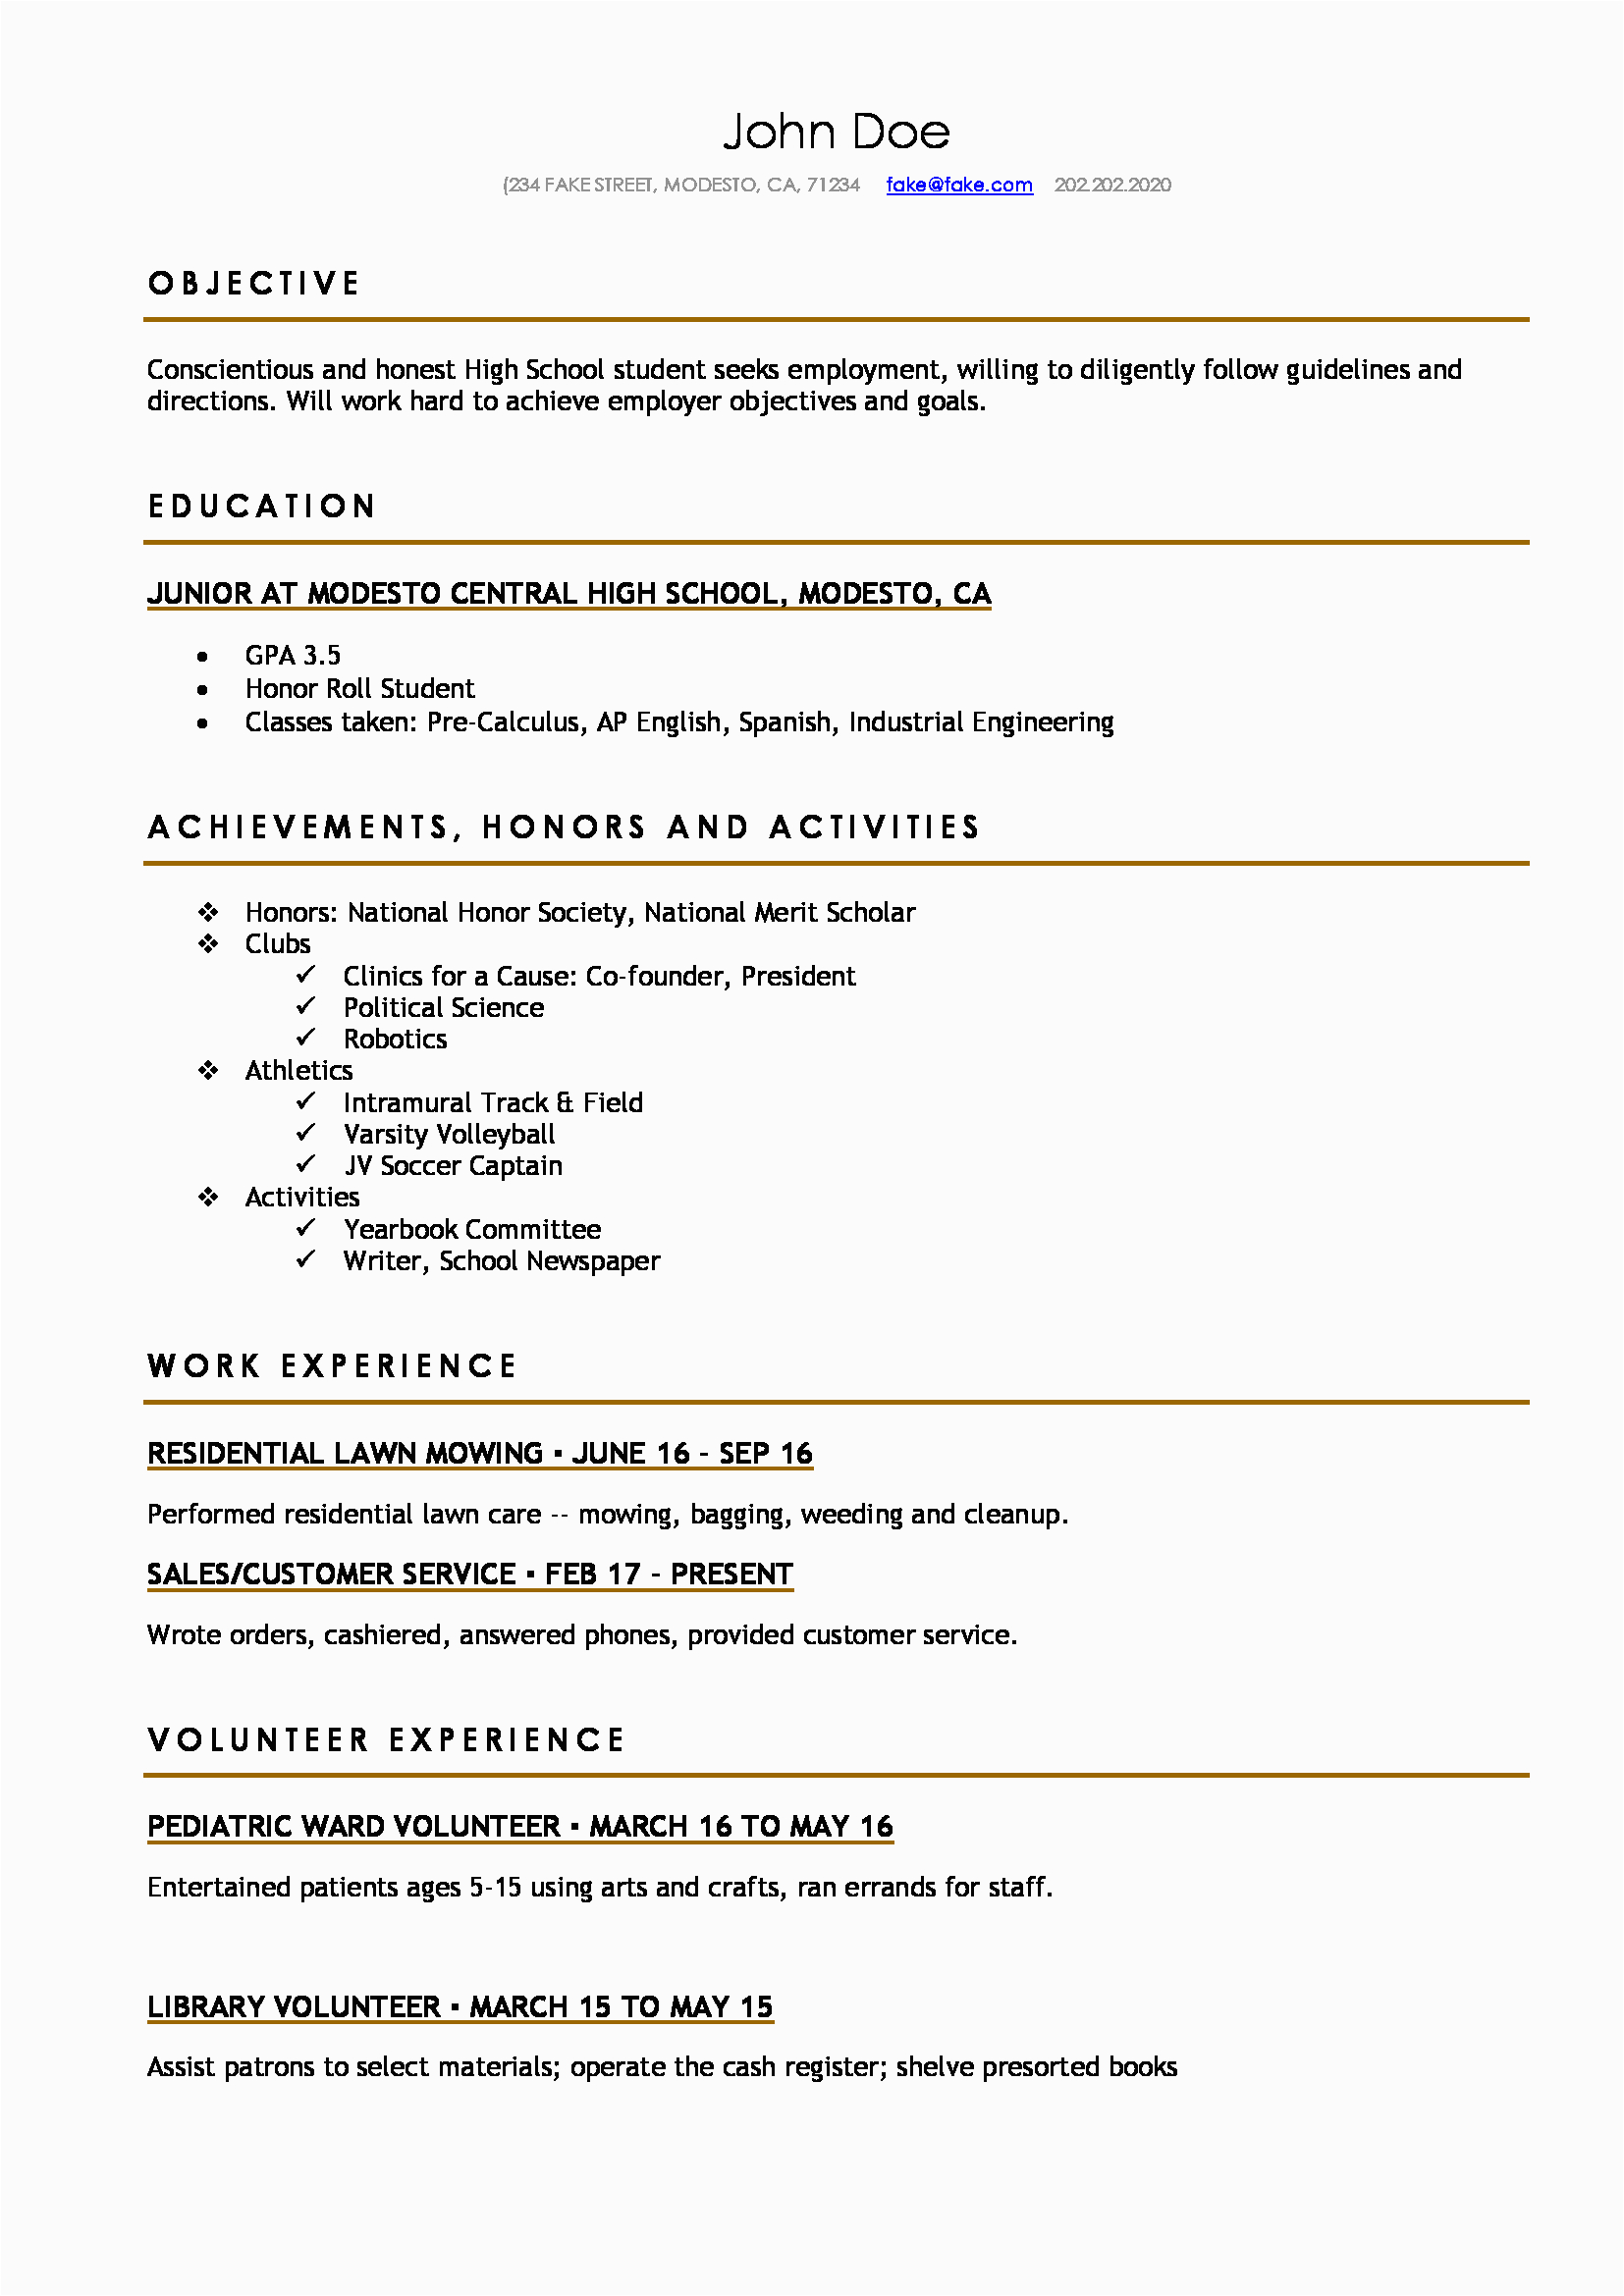 High School Resume Samples for Jobs High School Resume Resume Templates for High School Students and Teens